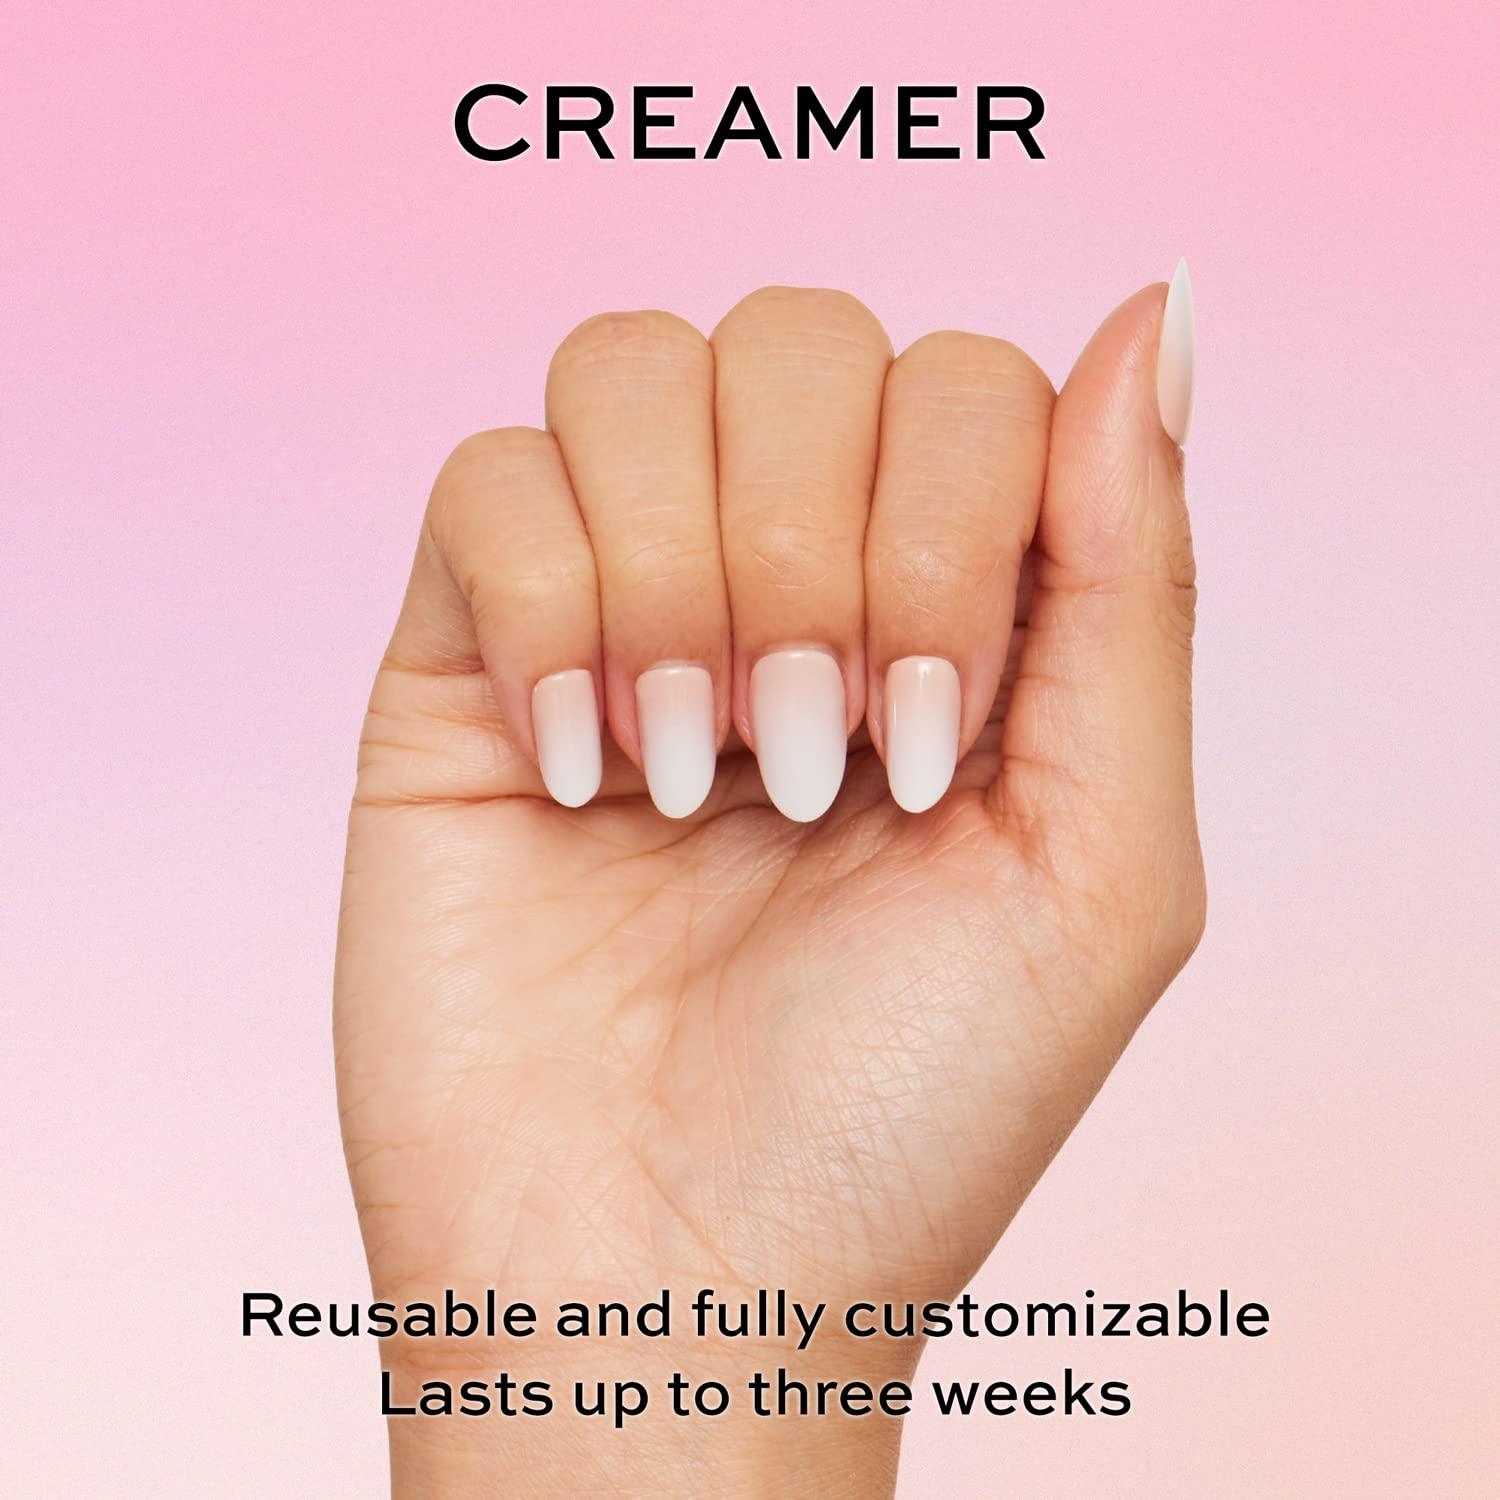 Glamnetic Press On Nails - Creamer | UV Finish Neutral Ombre Short Round  Nails, Reusable | 15 Sizes - 30 Nail Kit with Glue